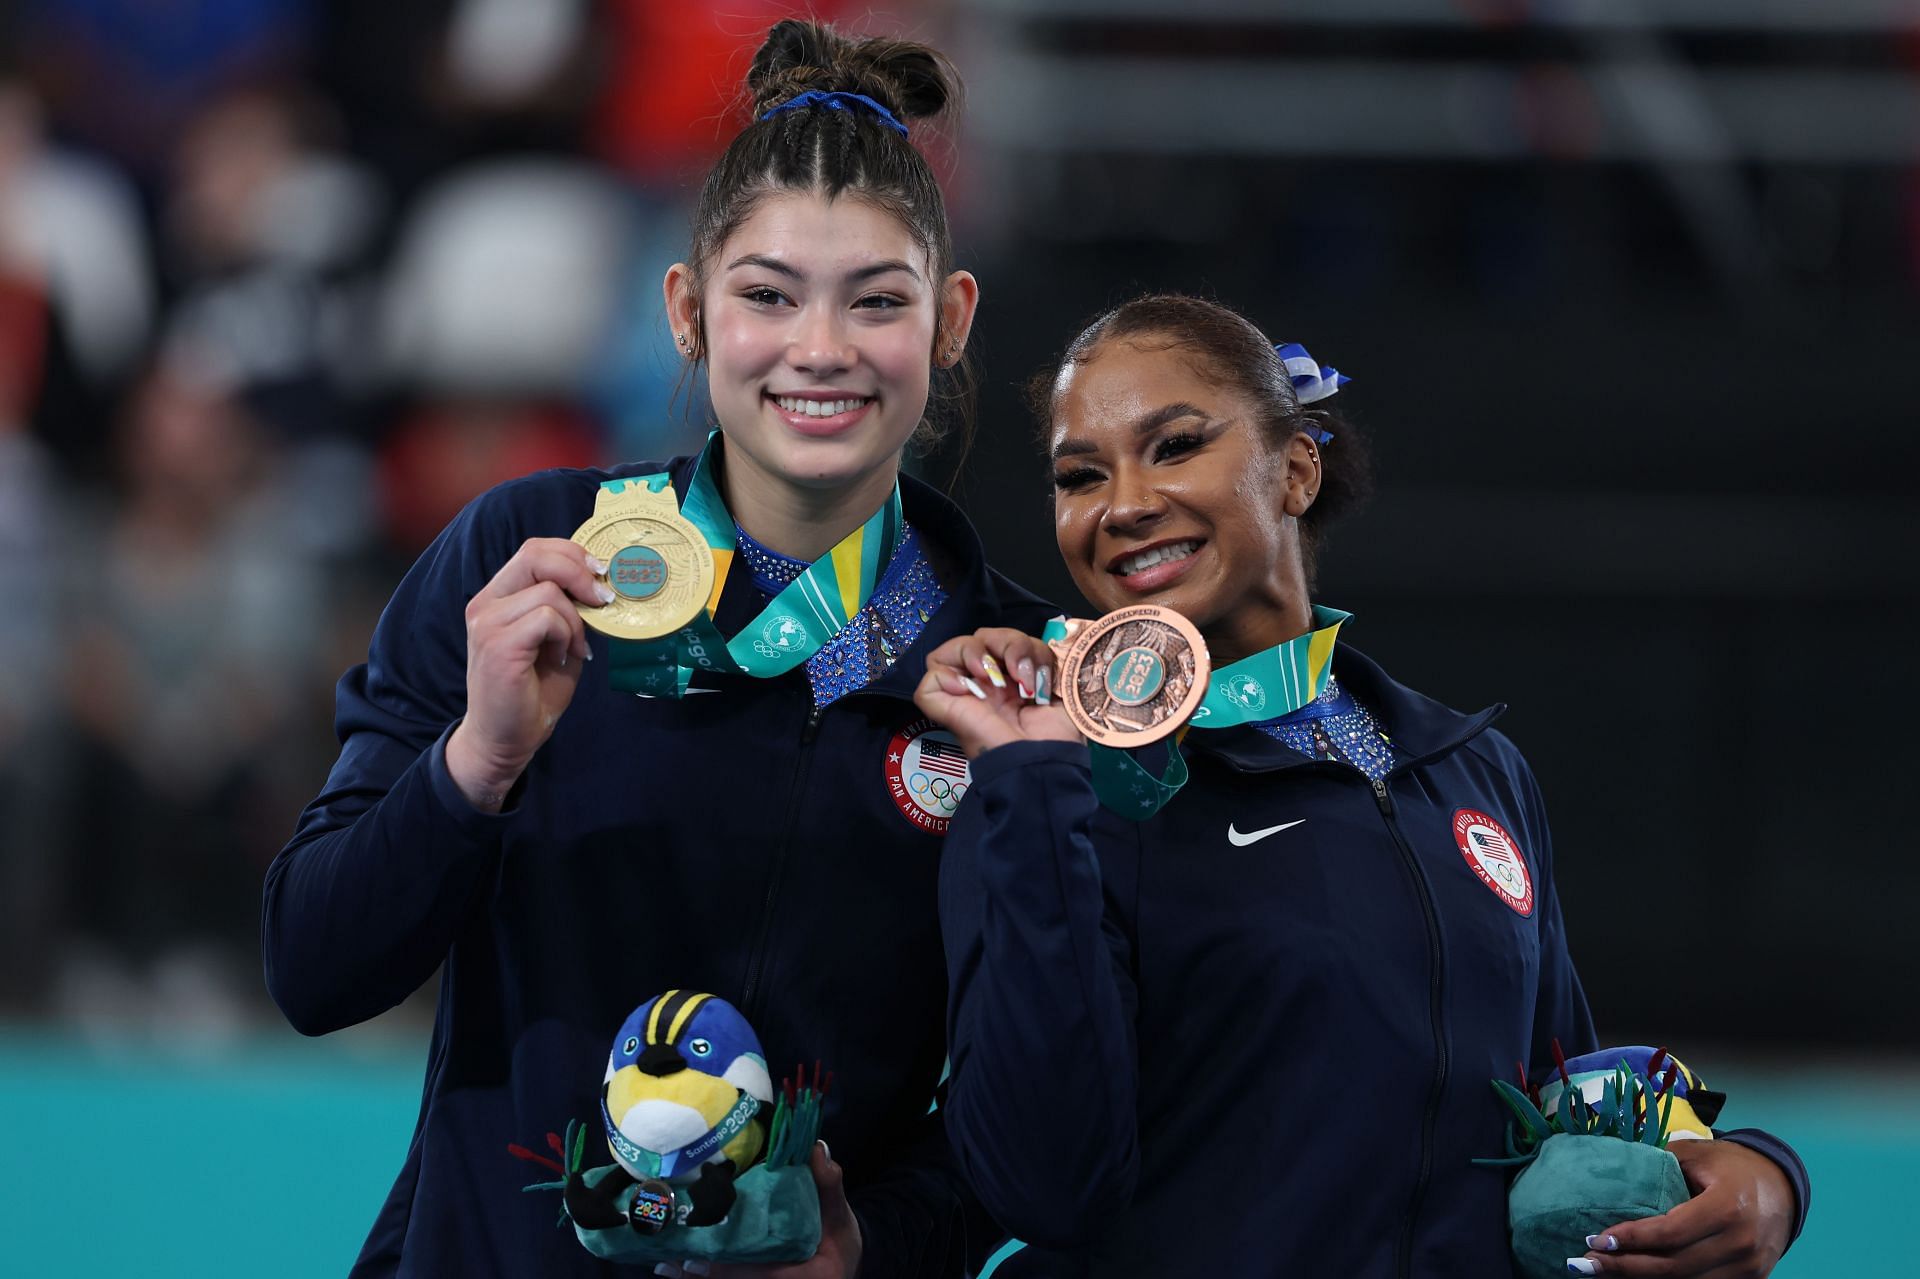 Kayla Dicello and Jordan Chiles pose after competing in Gymnastics - Women&#039;s All Around at the 2023 Pan Am Games in Santiago, Chile.